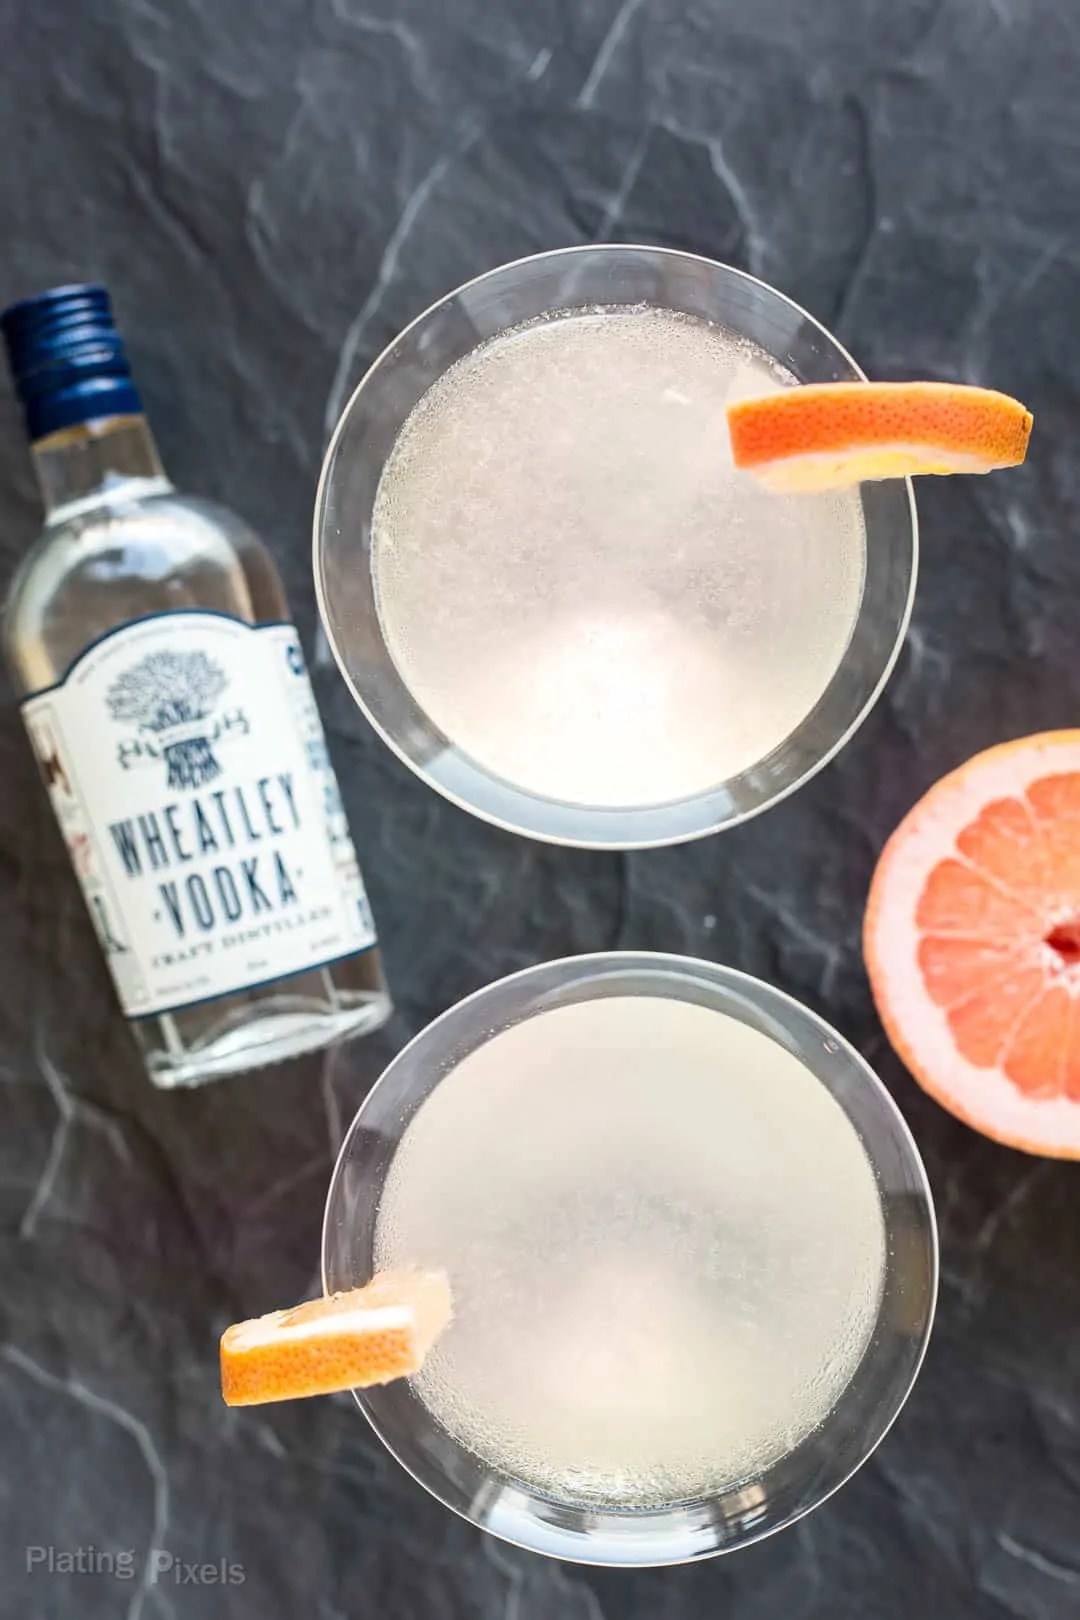 Overhead shot of Grapefruit Martinis next to a bottle of Wheatley Vodka